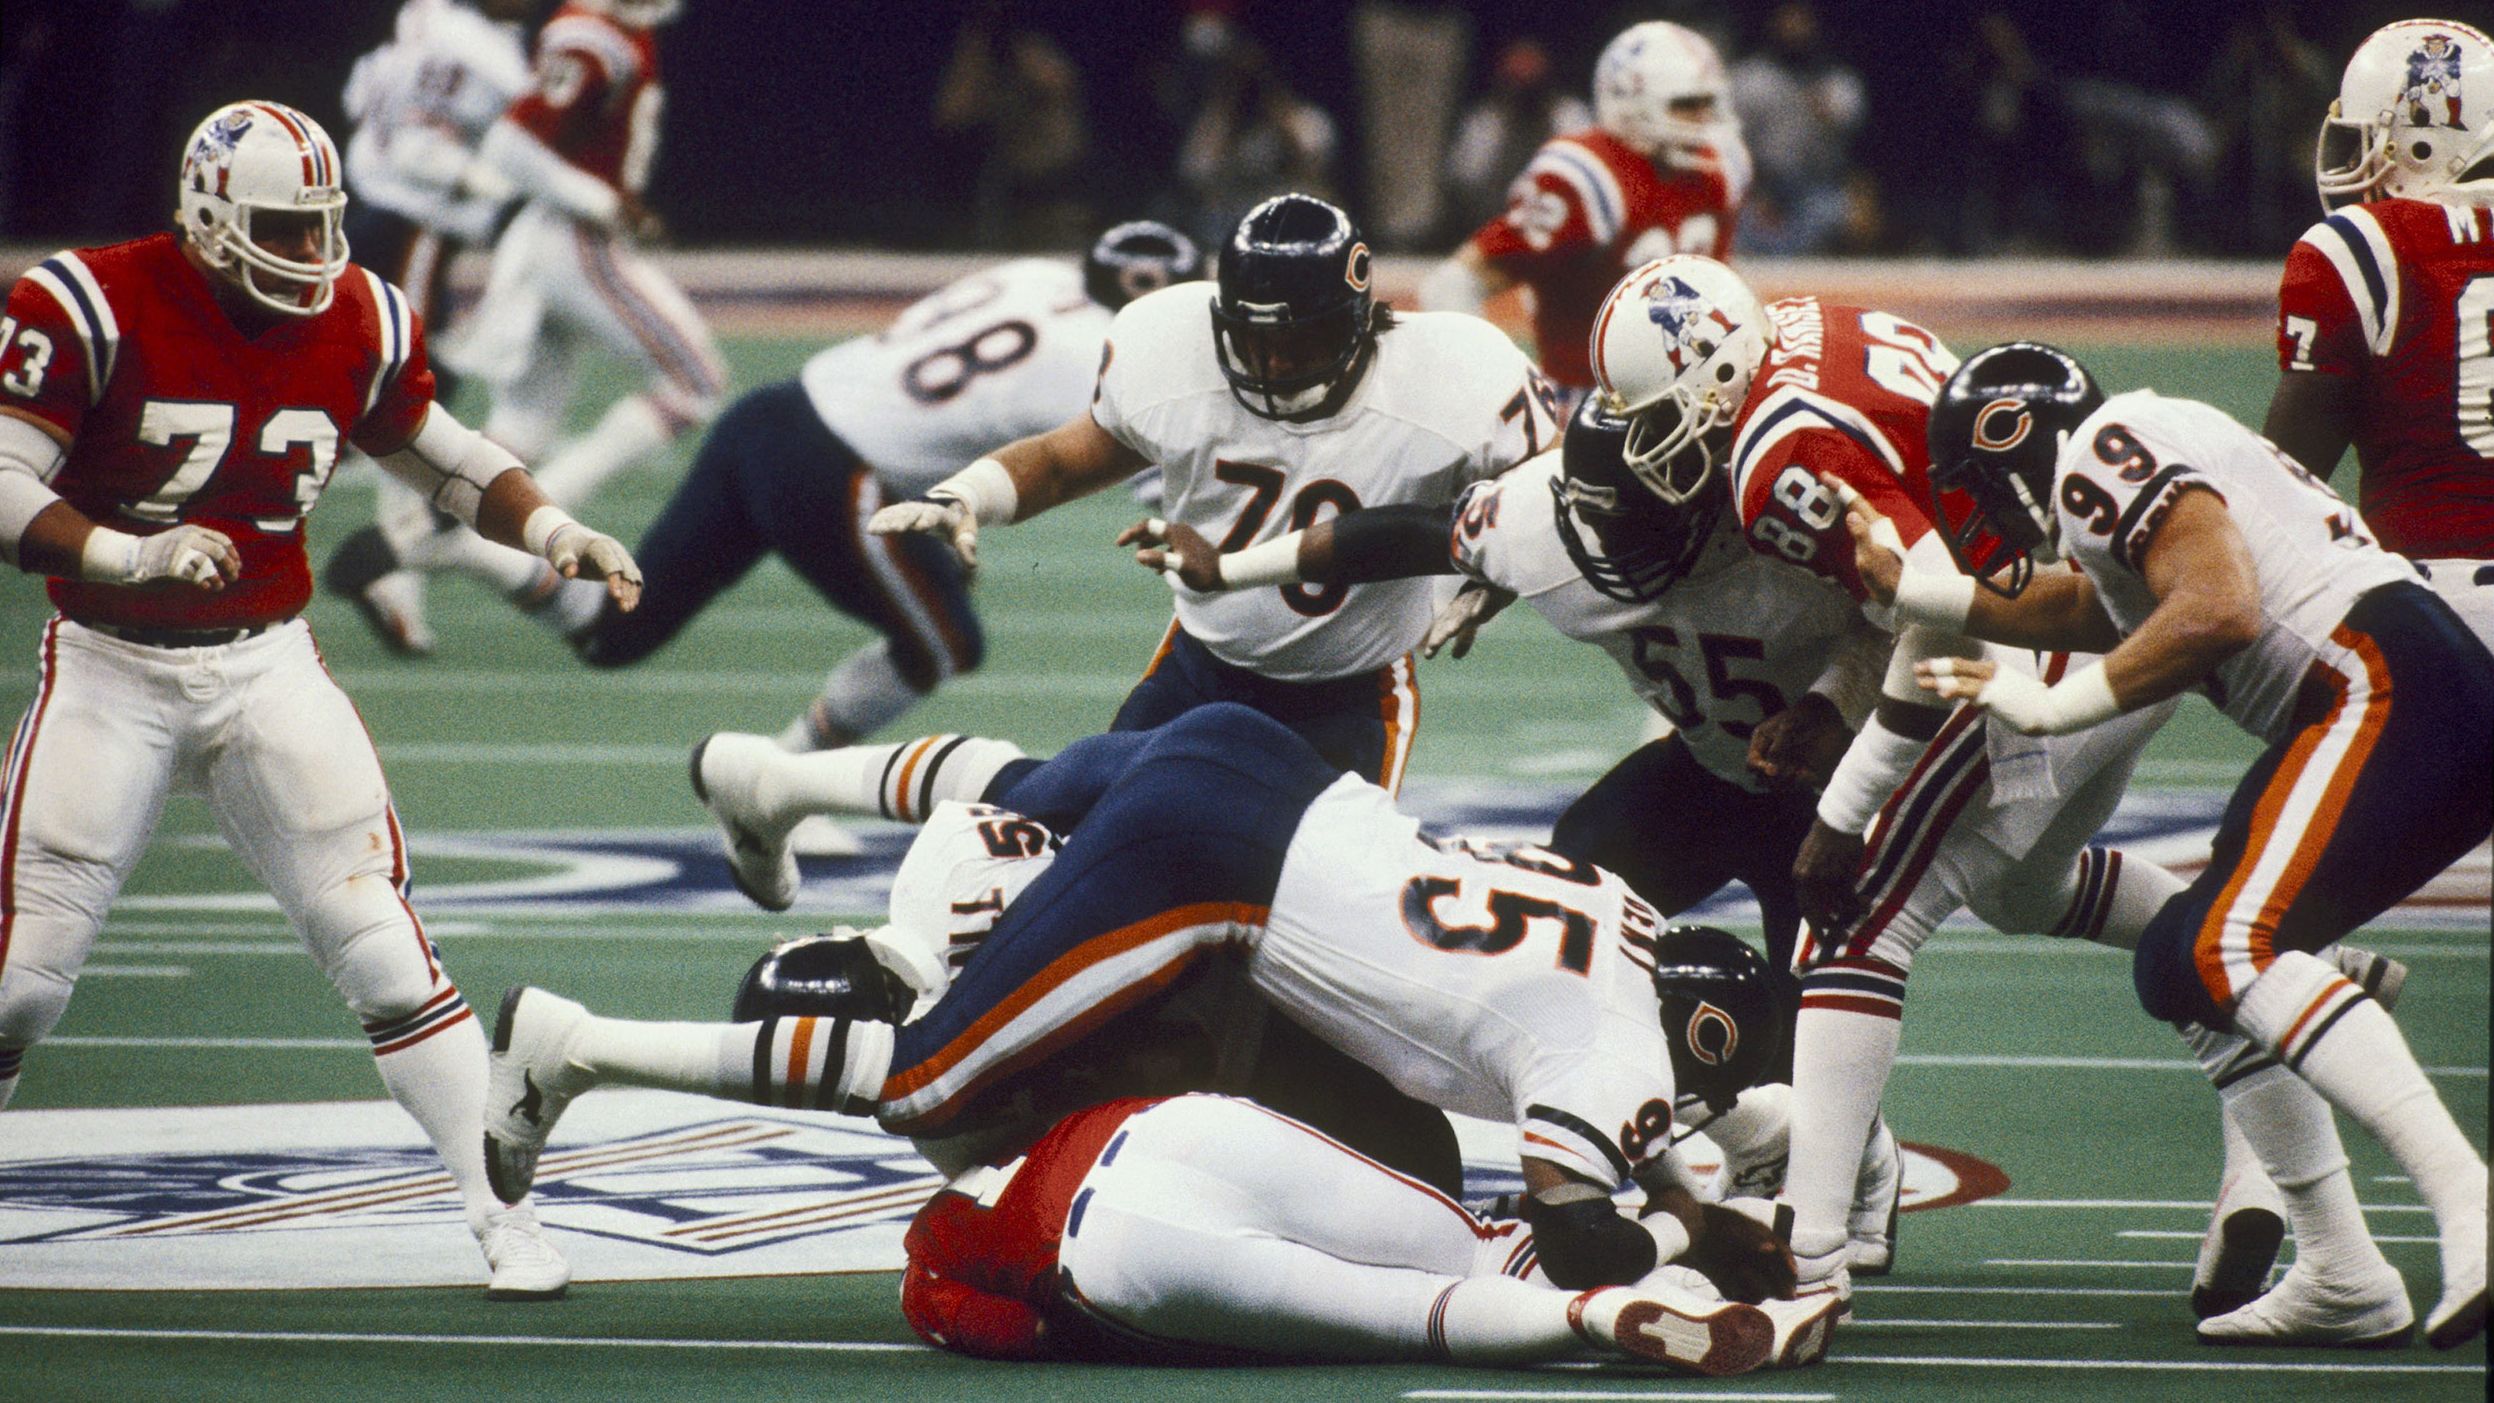 <strong>Super Bowl XX (1986):</strong> Chicago Bears defensive end Richard Dent (No. 95) sacks New England quarterback Steve Grogan during Super Bowl XX. Dent had two sacks and two forced fumbles as a devastating defense helped Chicago crush the Patriots 46-10.